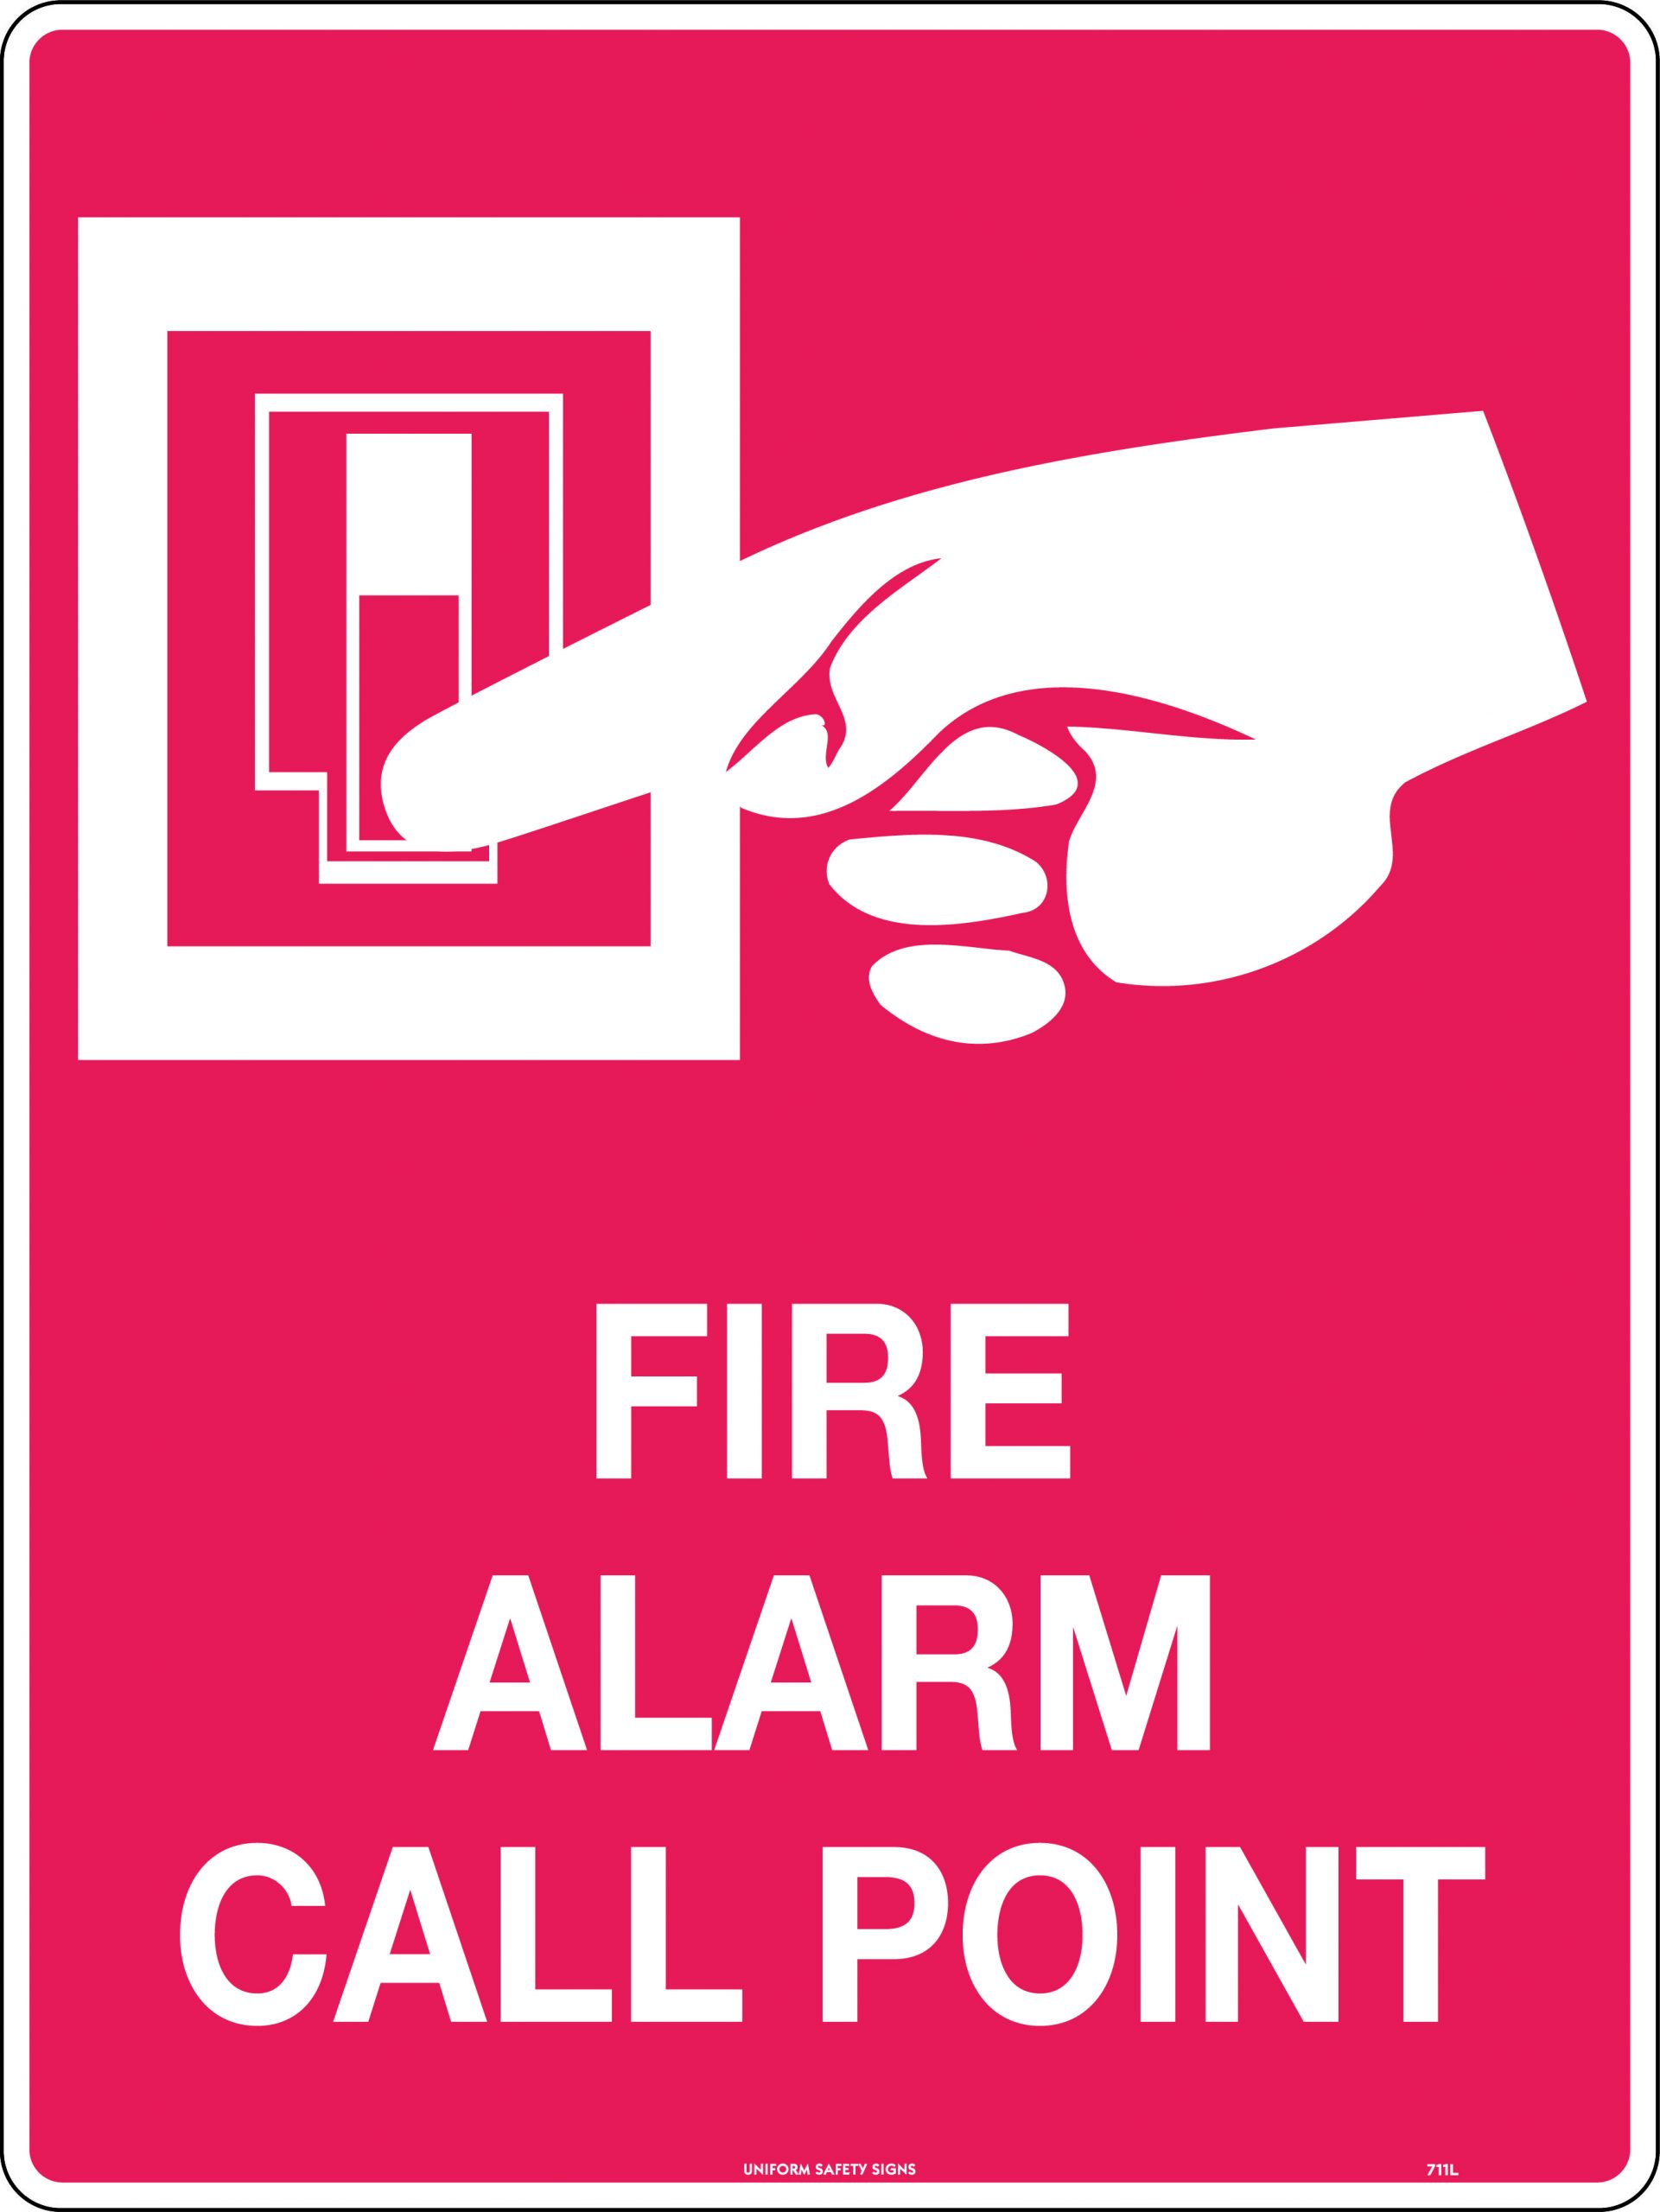 UNIFORM SAFETY 450X300MM METAL FIRE ALARM CALL POINT 